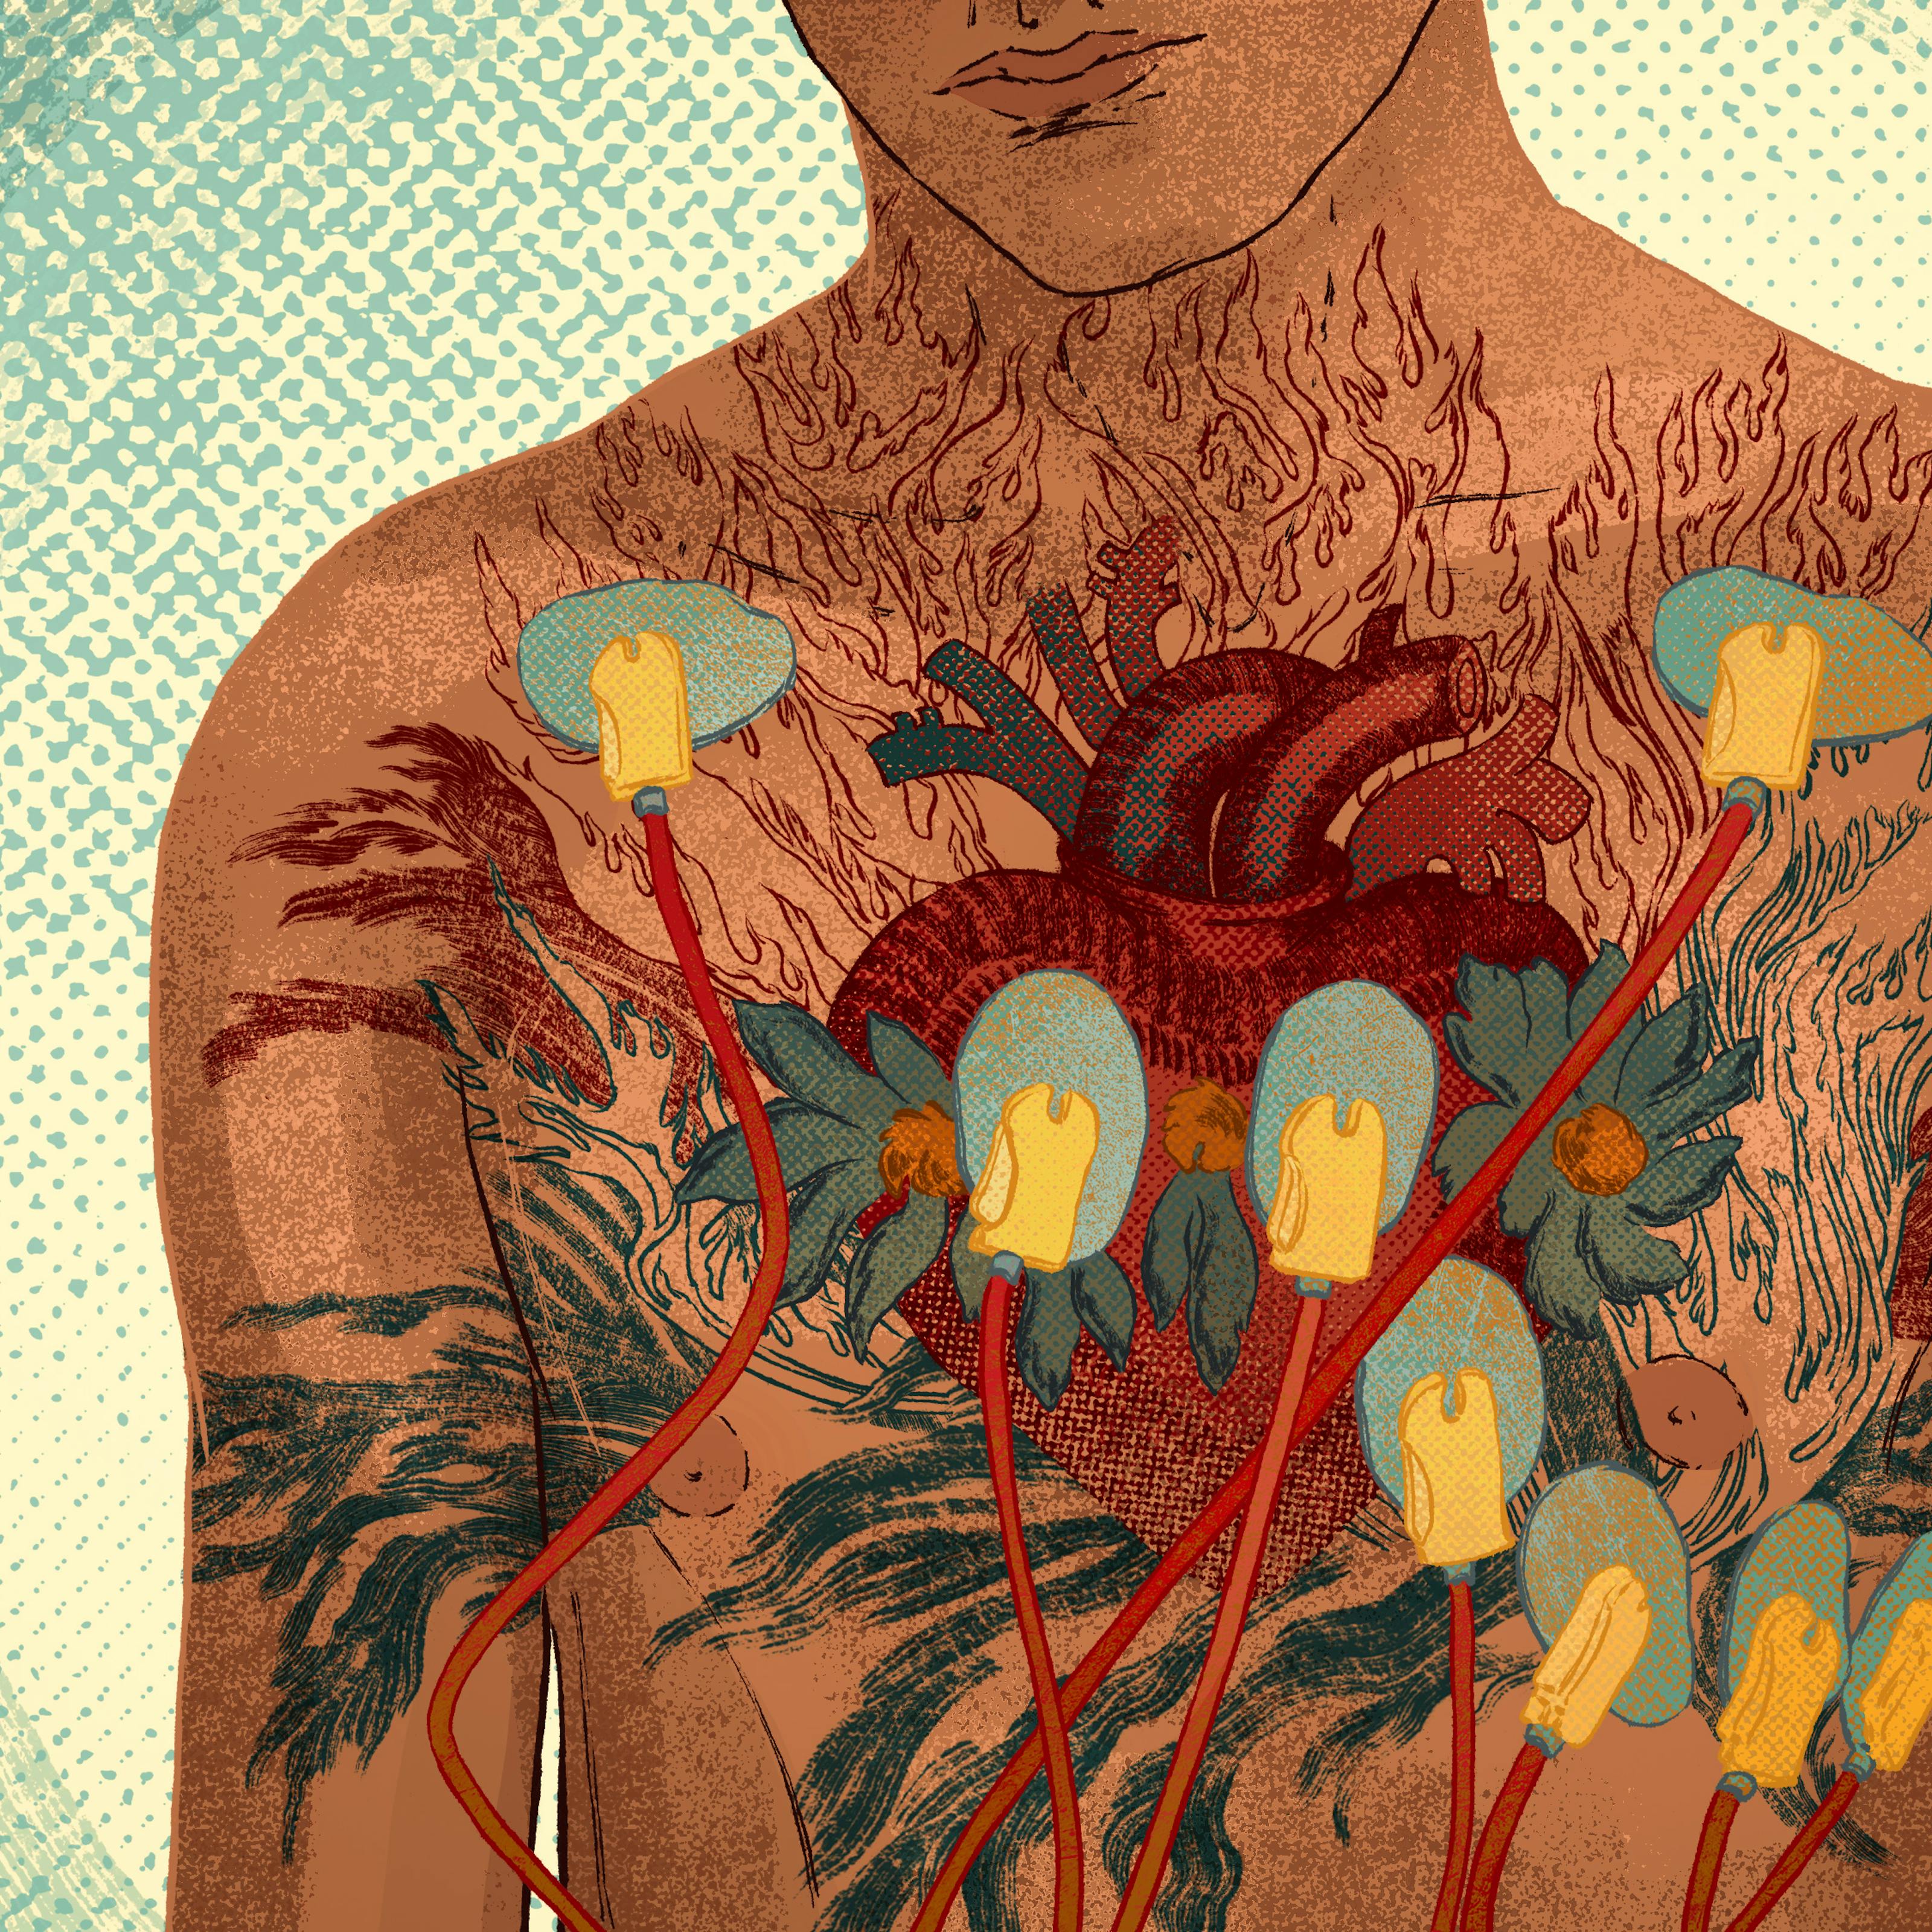 Digital colour artwork showing the bare chest, neck and chin of a man. On his chest is a colourful tattoo-like illustration of an anatomical drawing of a human heart set in flame-like decorative motifs. The tattoo is made up of red and blue tones. Attached to his chest, on top of the tattoo, are eight EGC heart monitoring electrodes with cables. Behind the figure is an abstract concentric circle and half-tone printed background pattern in yellows and blues.